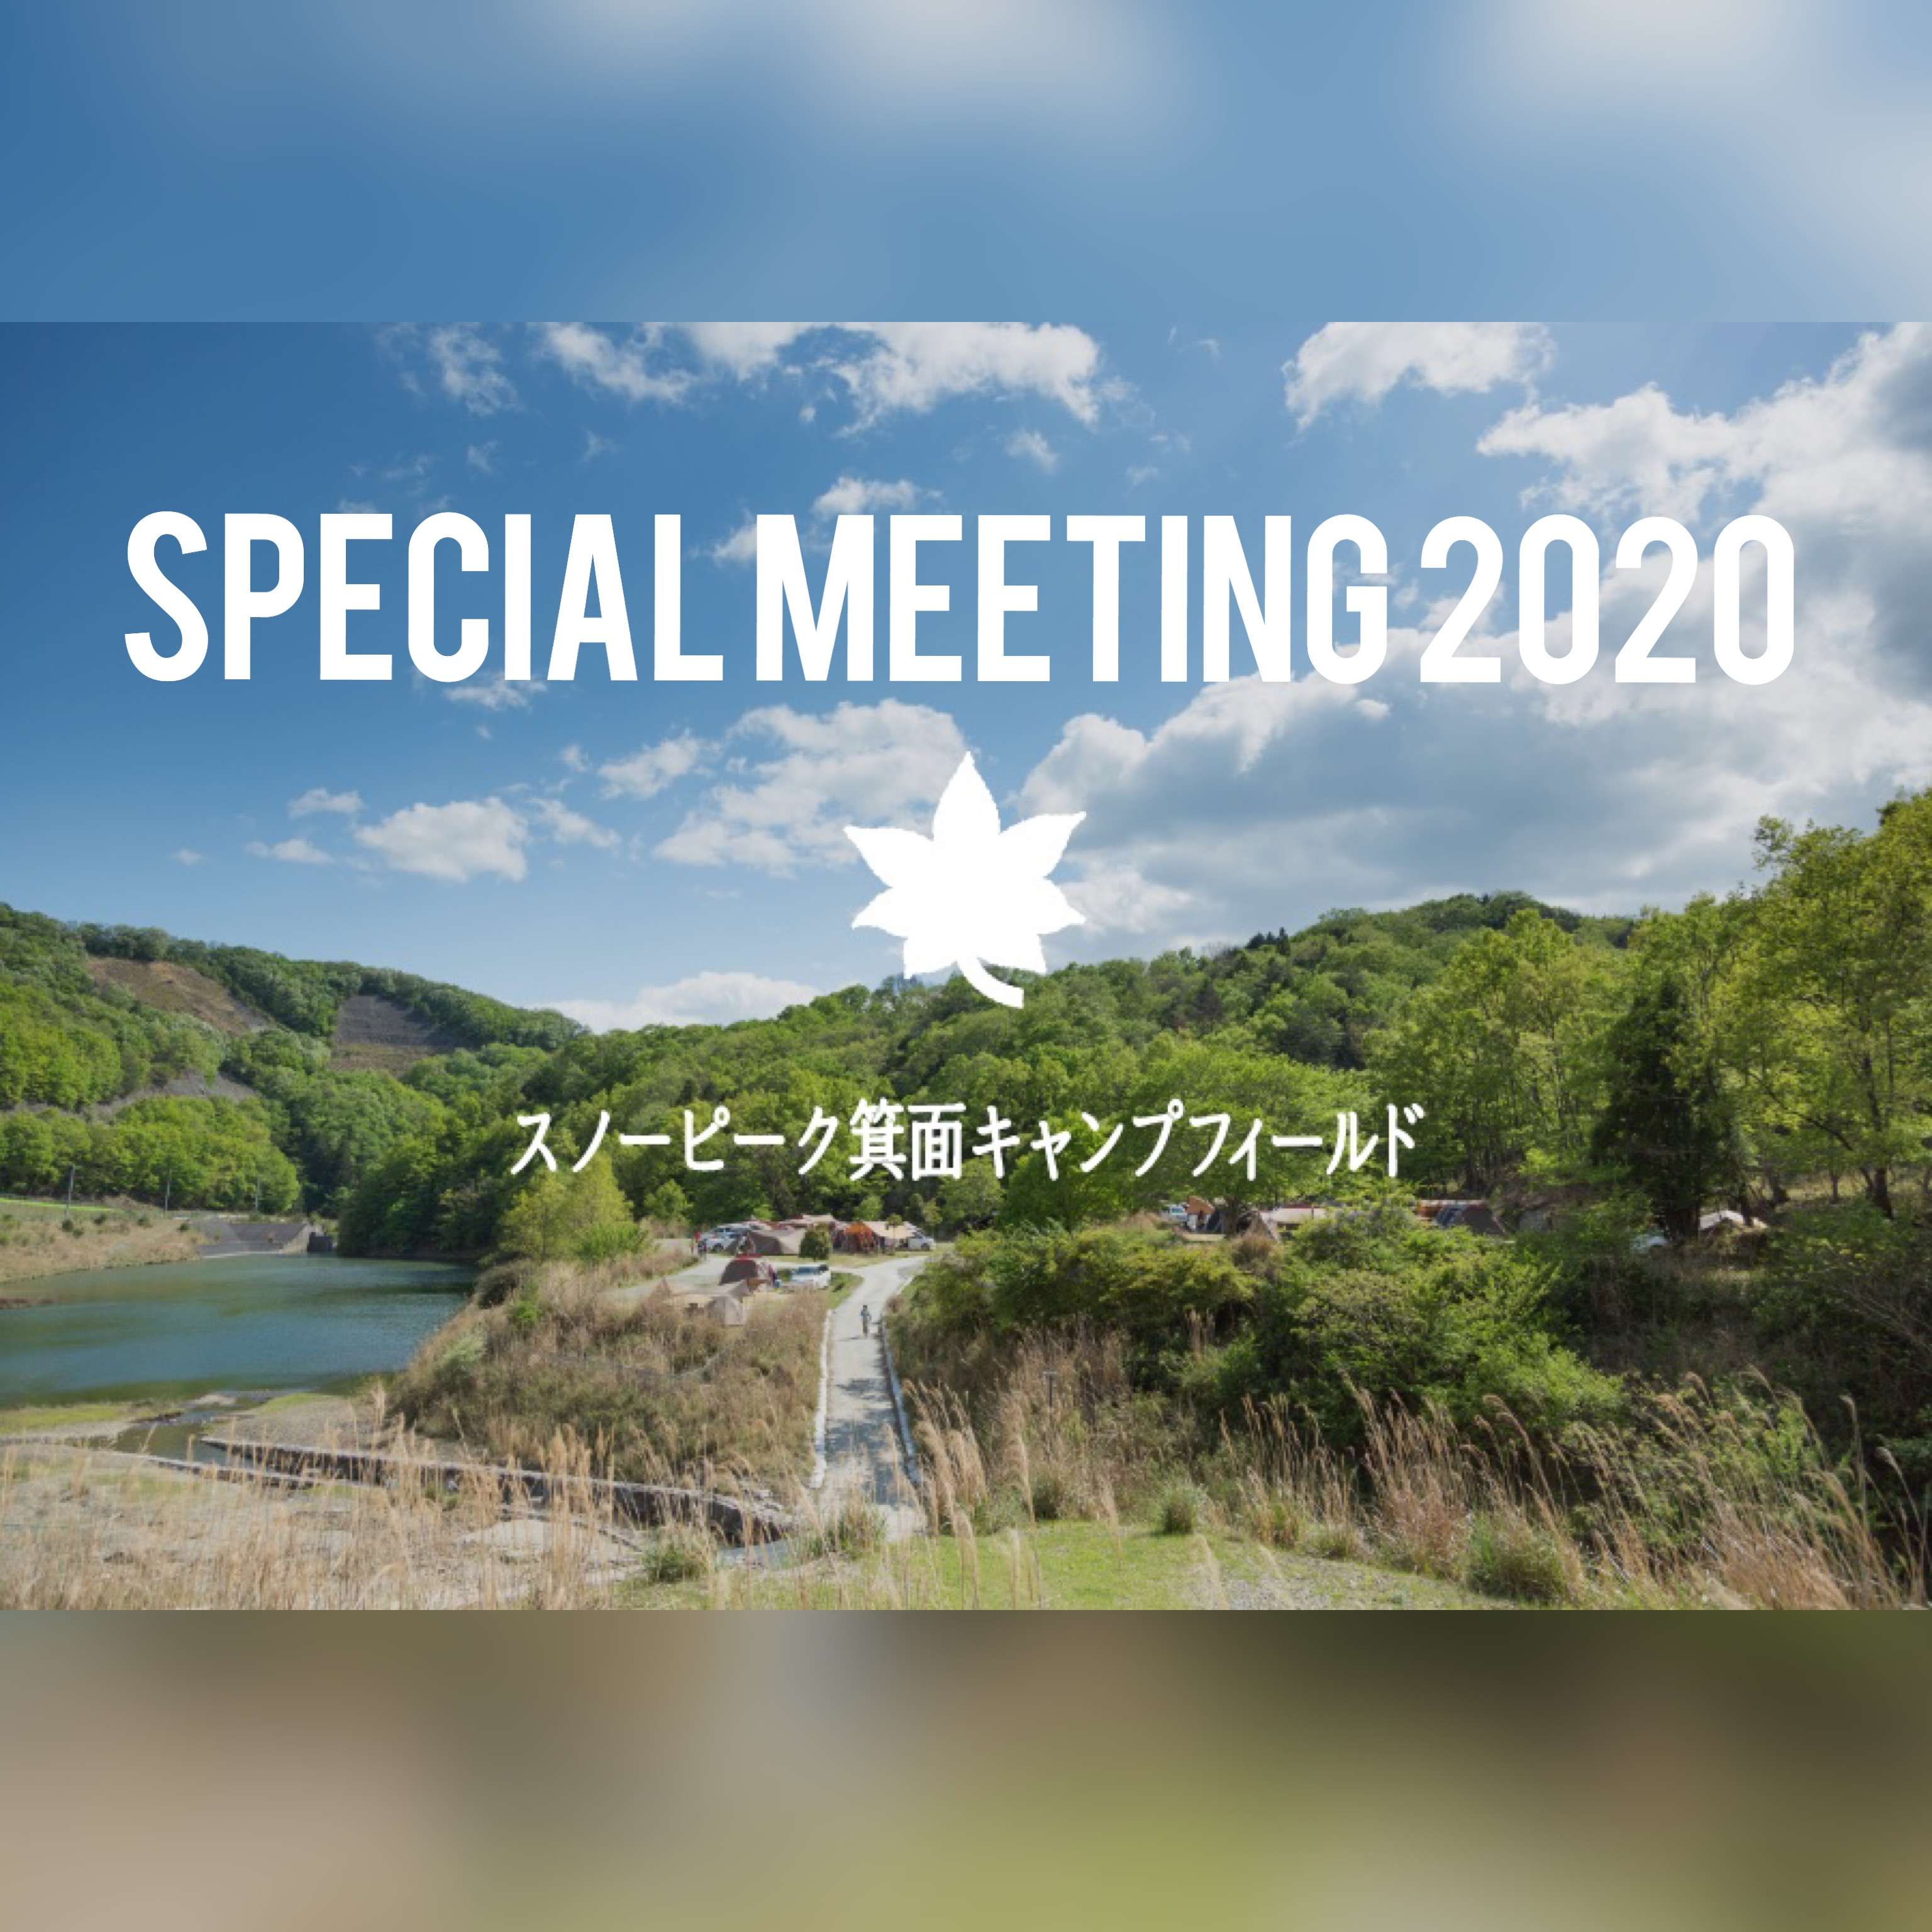 【SPECIAL MEETING 2020のご案内】